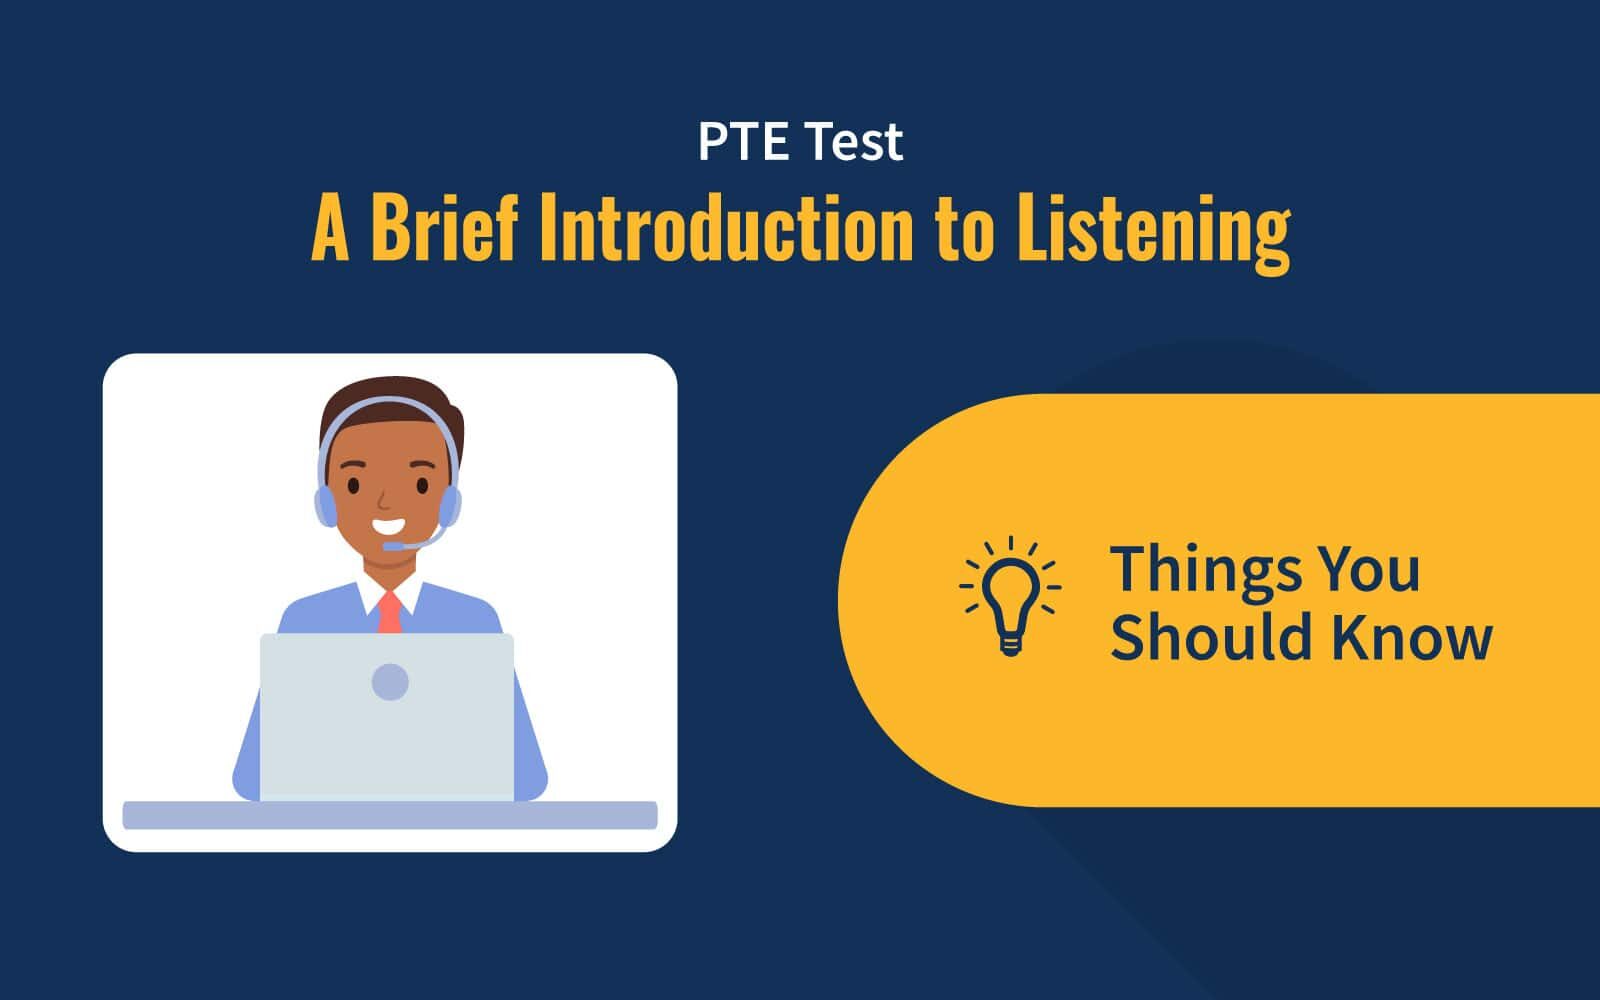 PTE Test: A Brief Introduction to Listening